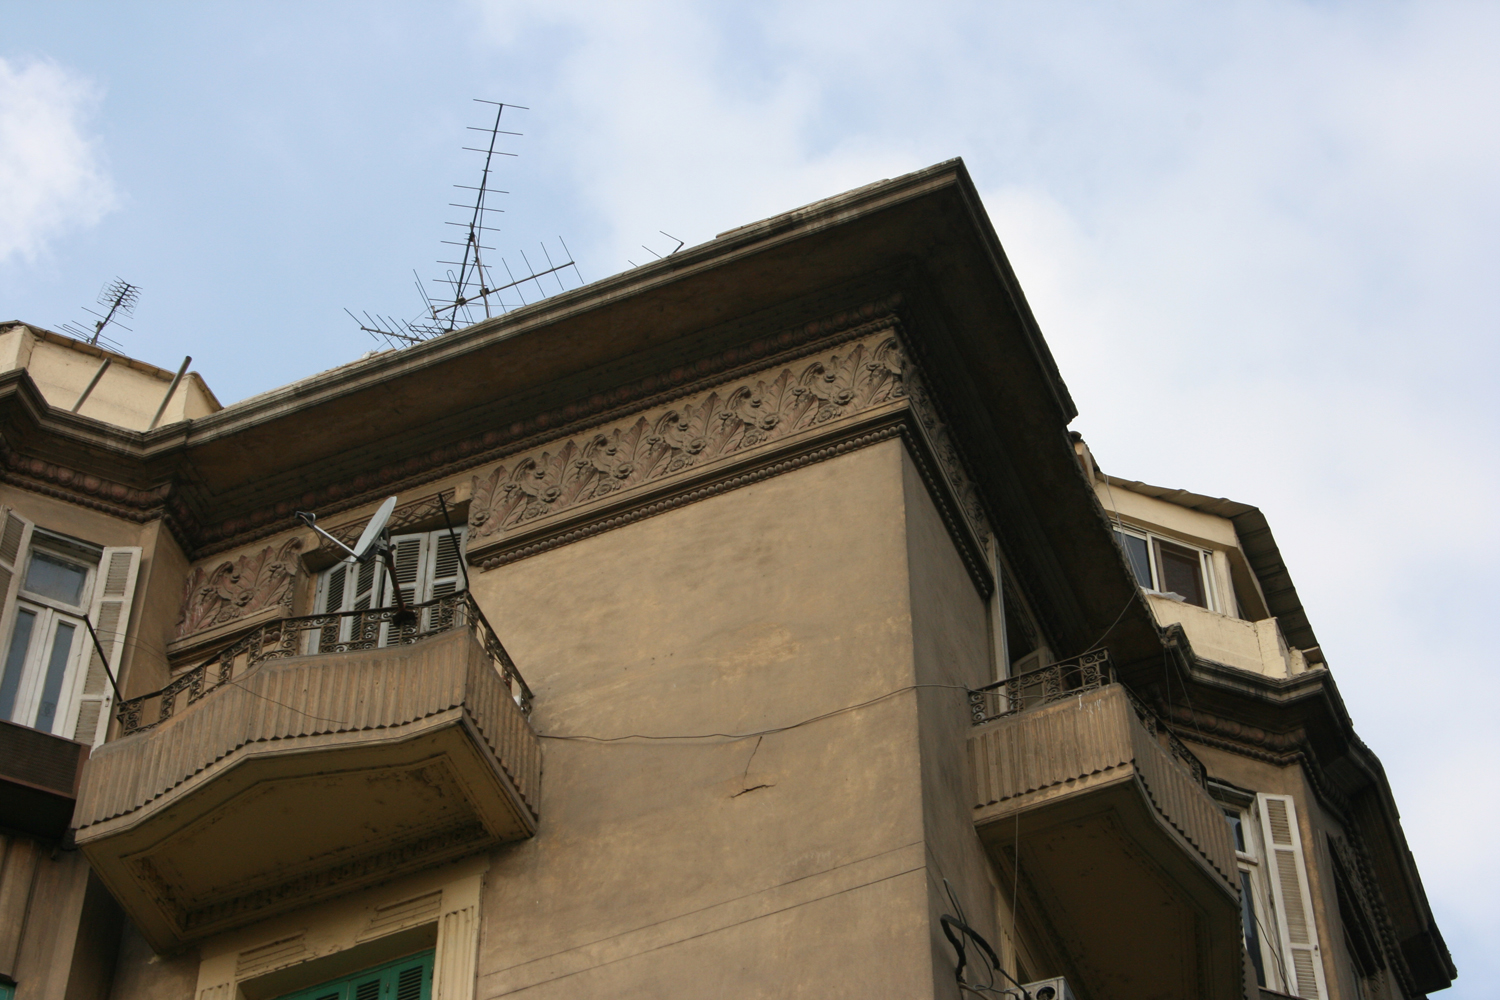 Detail of the facade with a decorative frieze under the cornice